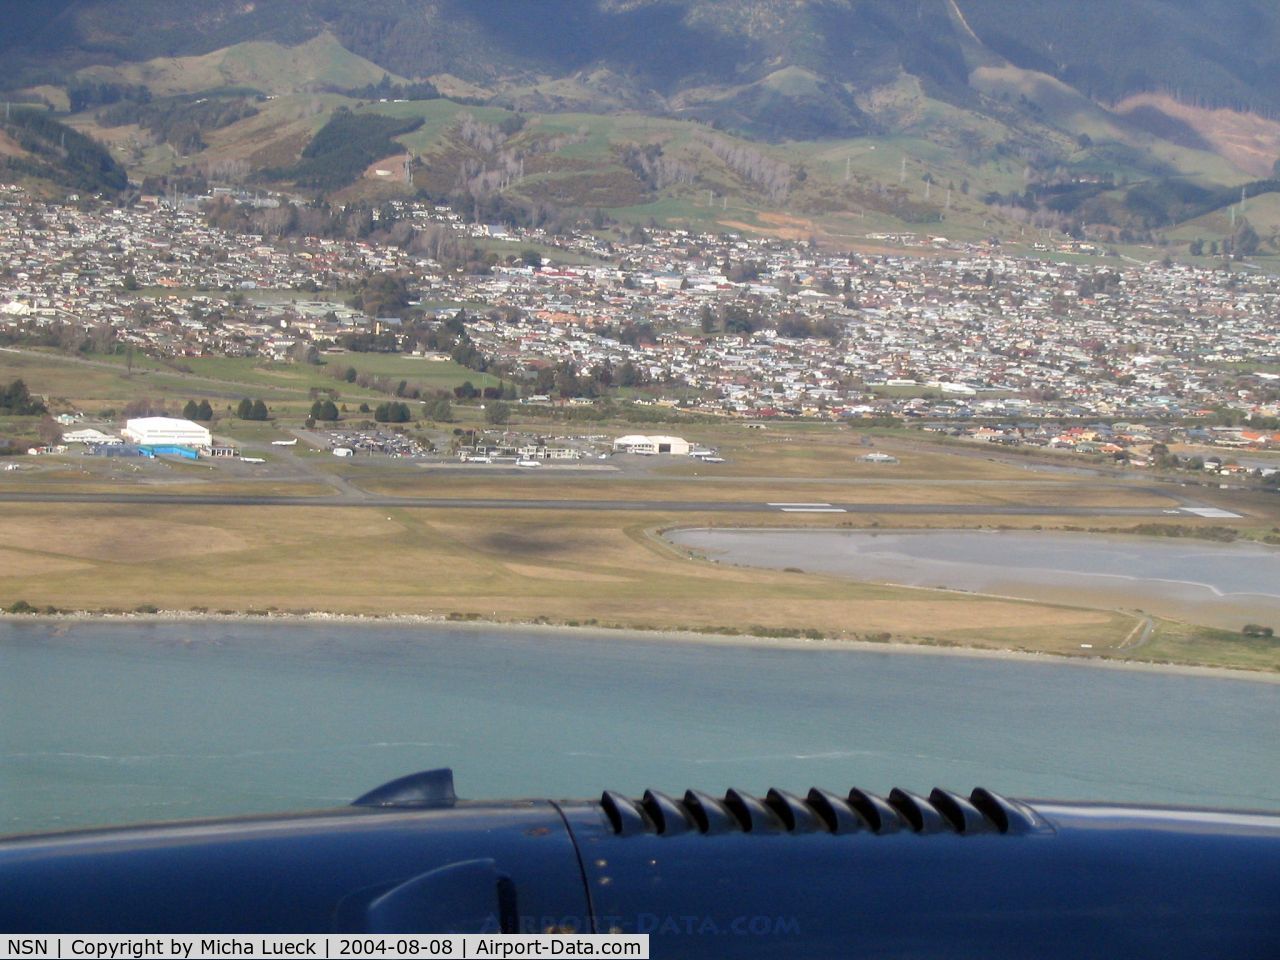 Nelson Airport, Nelson New Zealand (NSN) - Nelson airport, seen from BAe J41 (ZK-JSE) of Origin Pacific, enroute from Wellington